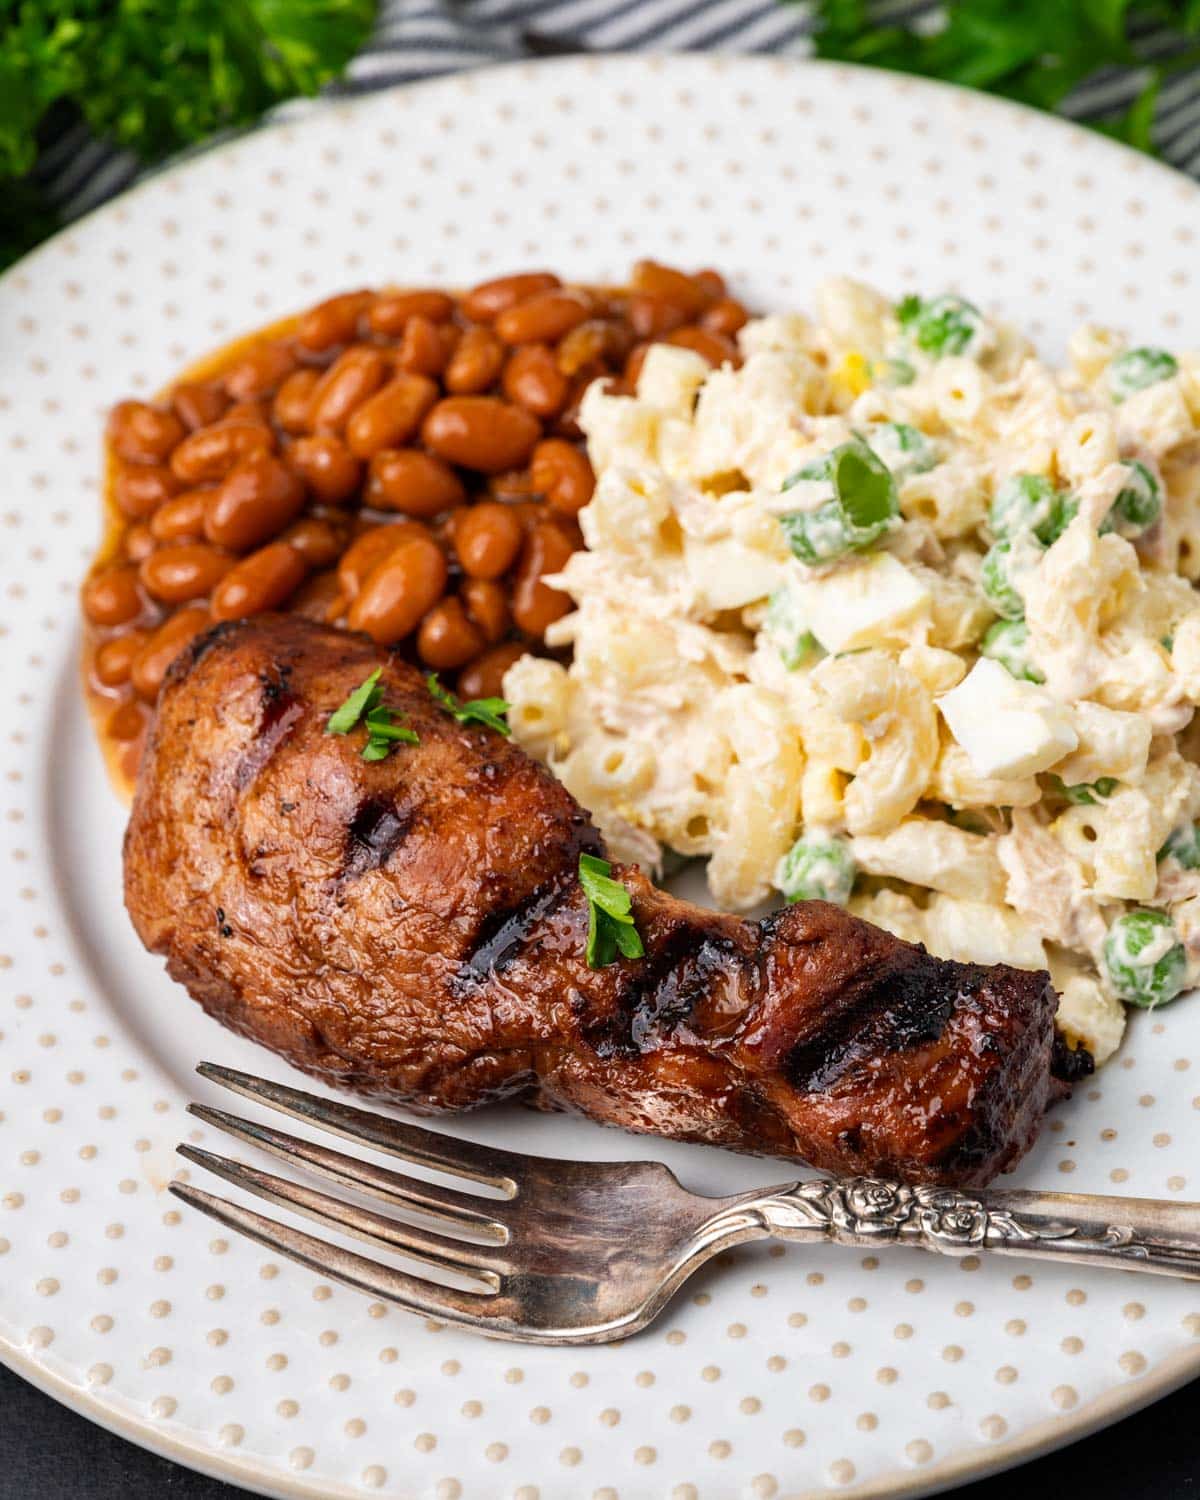 a plate of marinated spare ribs with macaroni salad and baked beans